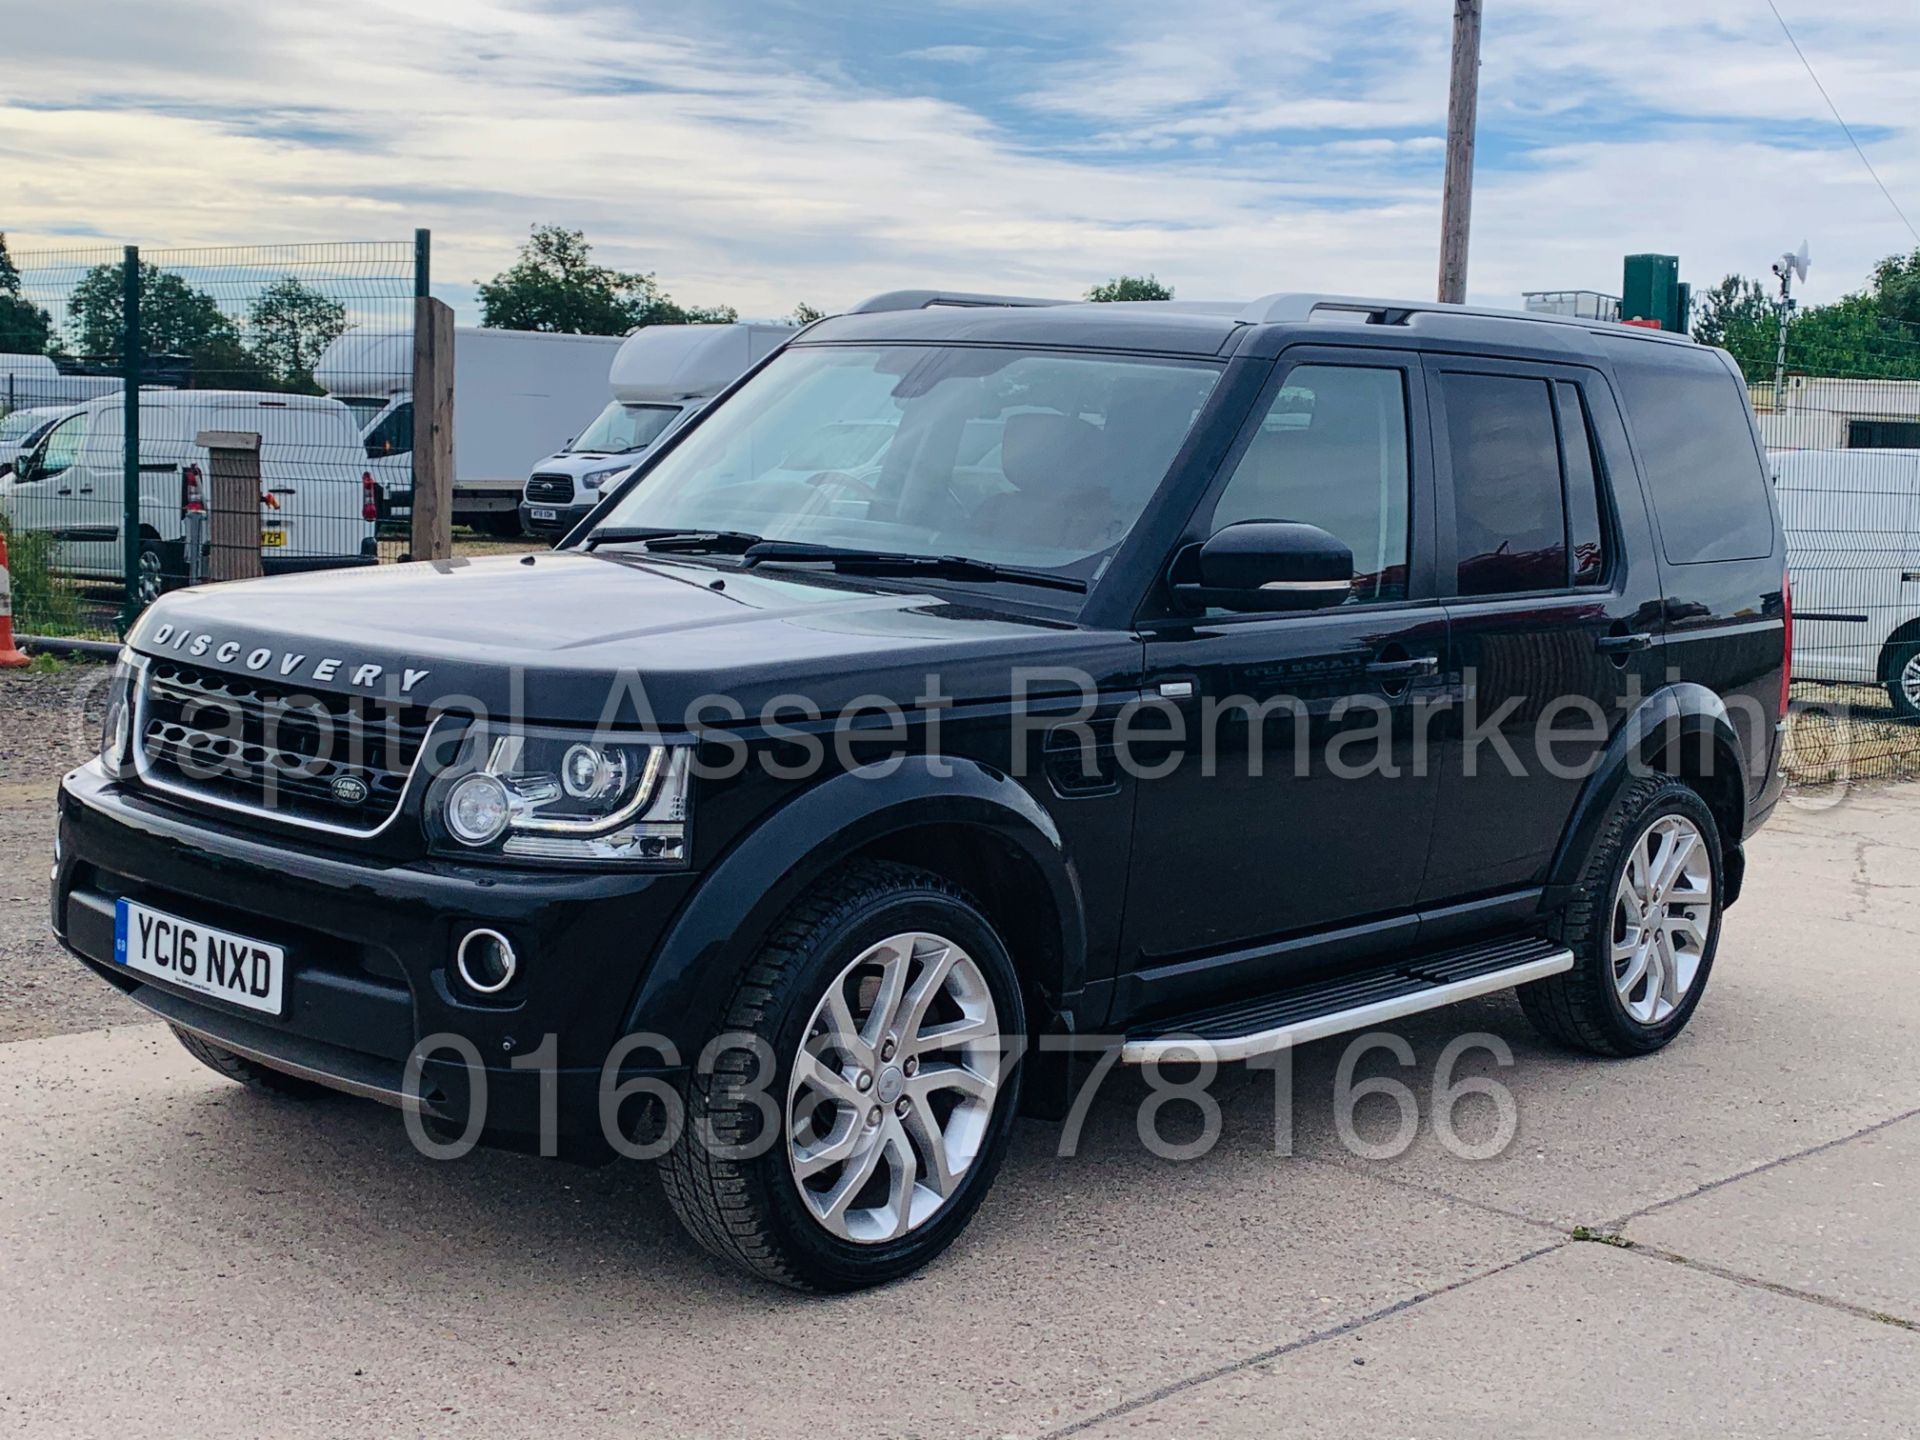 (On Sale) LAND ROVER DISCOVERY 4 *LANDMARK* 7 SEATER SUV (2016) '3.0 SDV6 - 8 SPEED AUTO' (1 OWNER) - Image 6 of 65